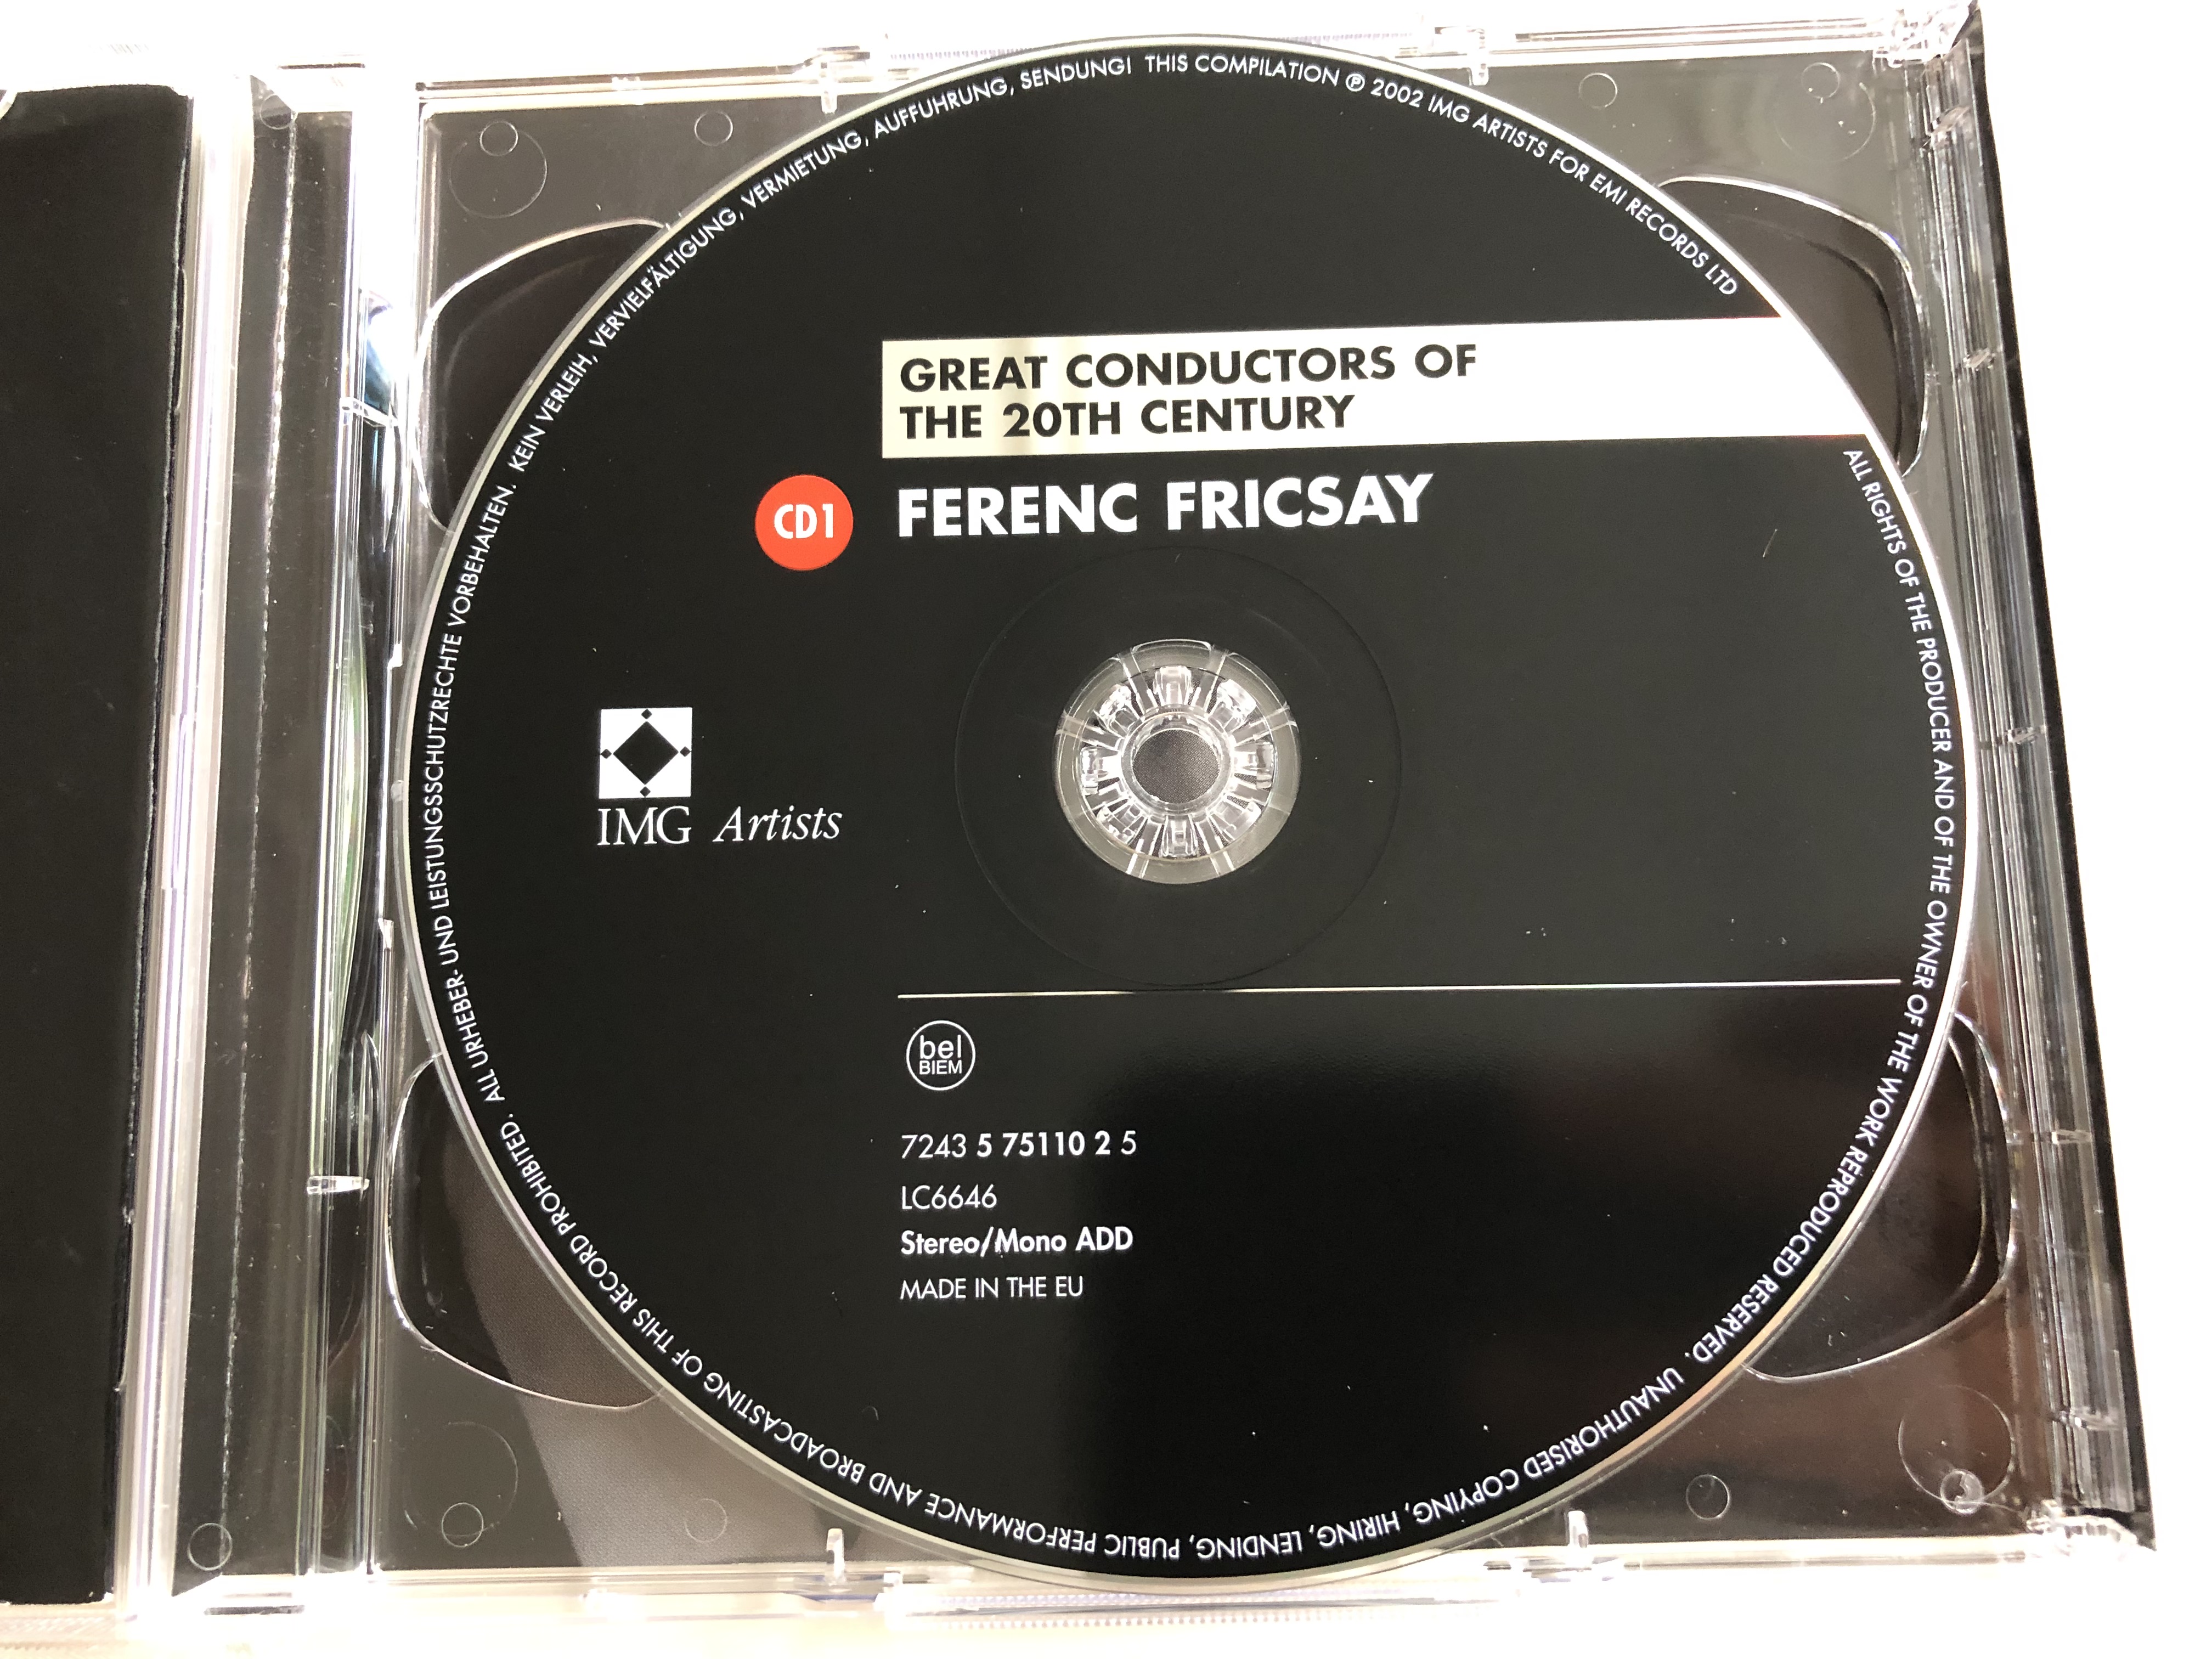 ferenc-fricsay-great-conductors-of-the-20th-century-dukas-kod-ly-shostakovich-hindemith-j.-strauss-beethoven-mozart-2cd-3-.jpg